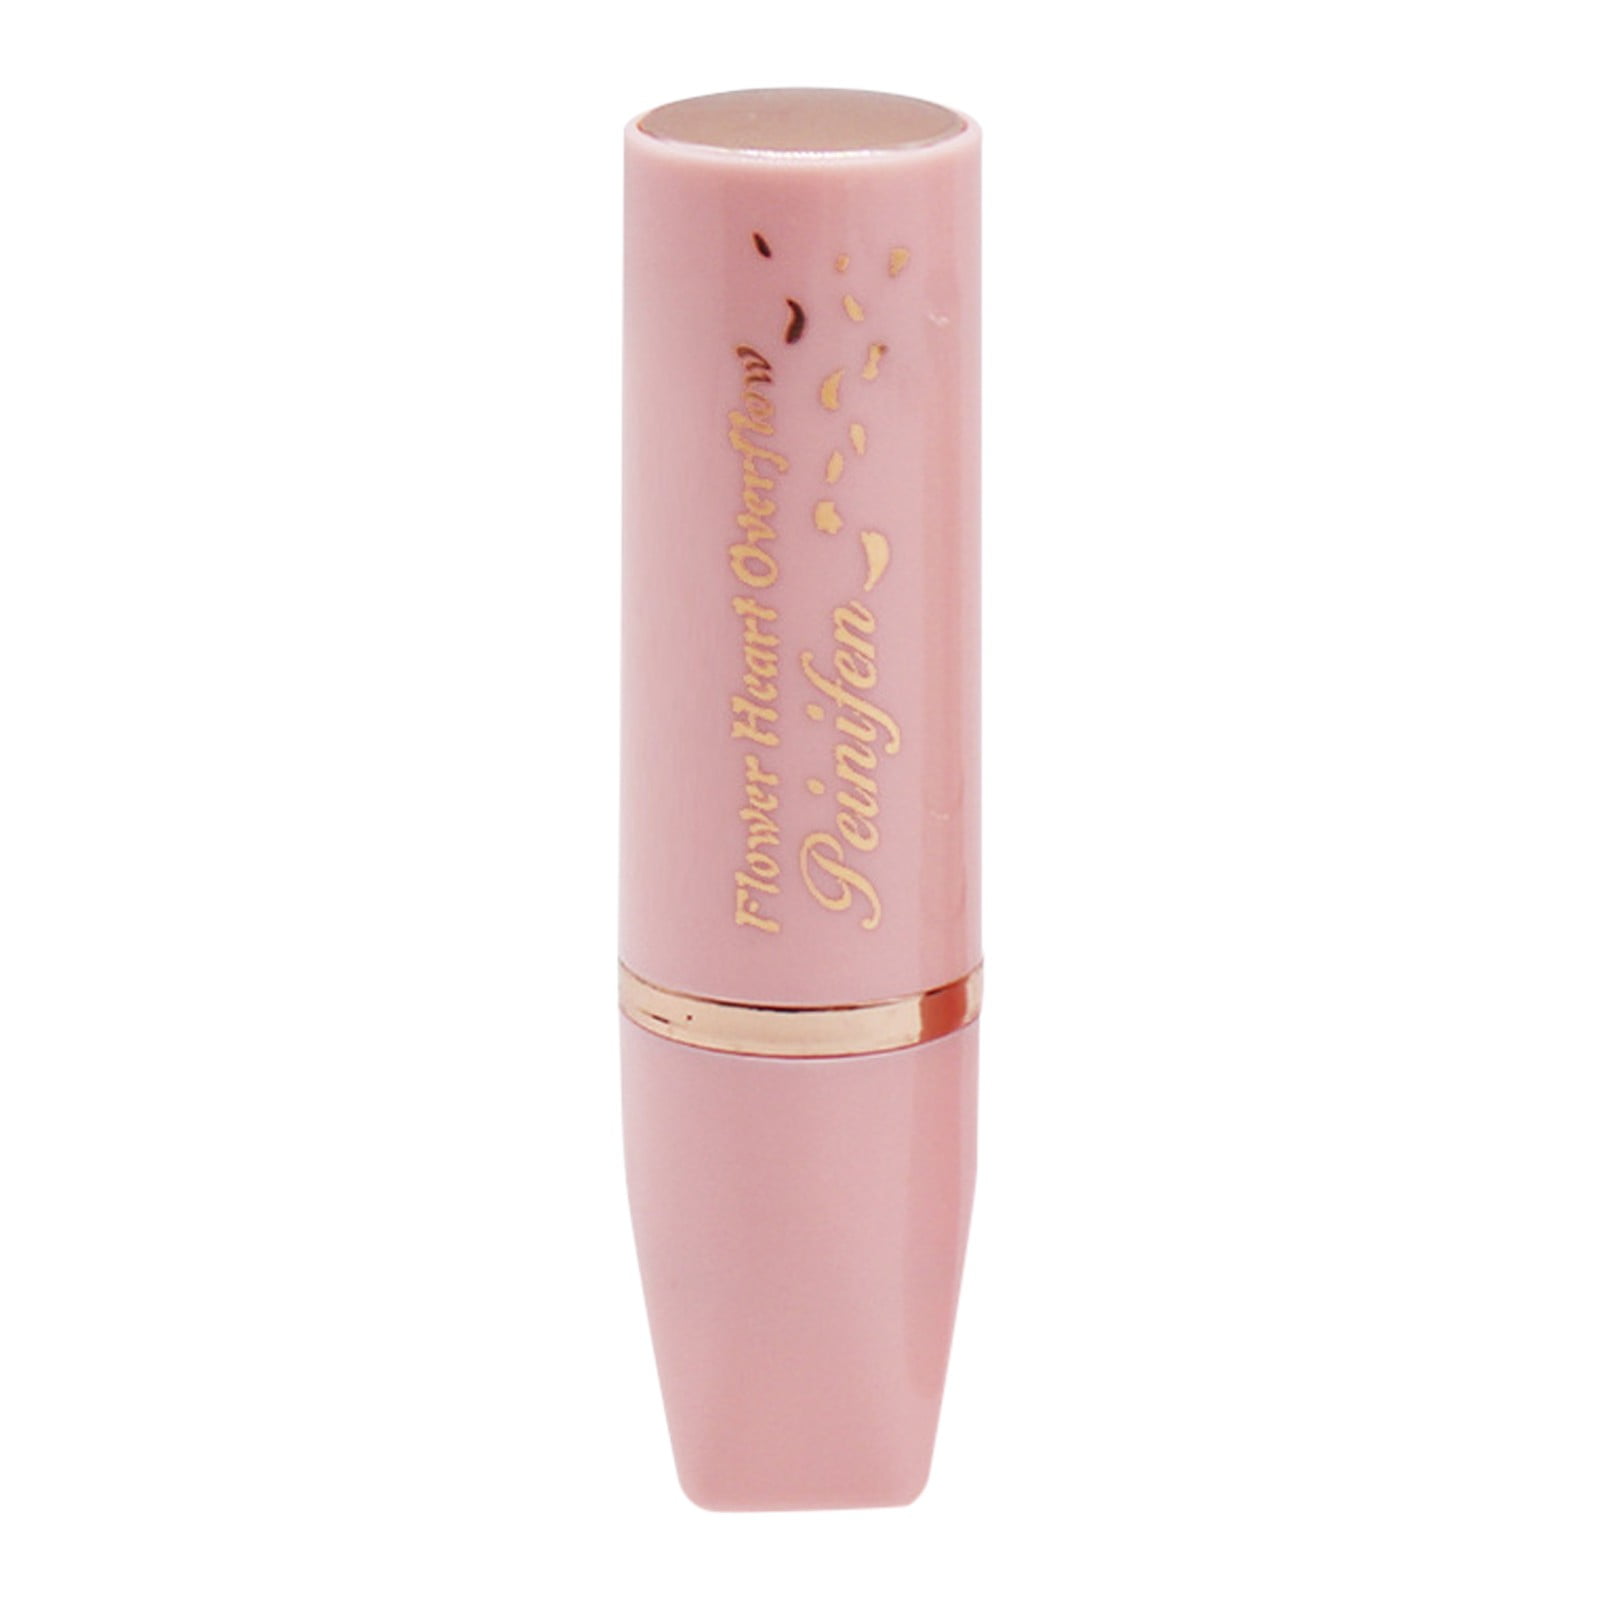 ZHAGHMIN Thick Lip Gloss Flower Moisturizing Lipstick Moisturizing Lipstick  Jelly Flower Lipstick Lip Balm Hydrating Moisturizing Hydrating Dry Natural  Pigment for Lip Gloss Color Changing Lip Balm 